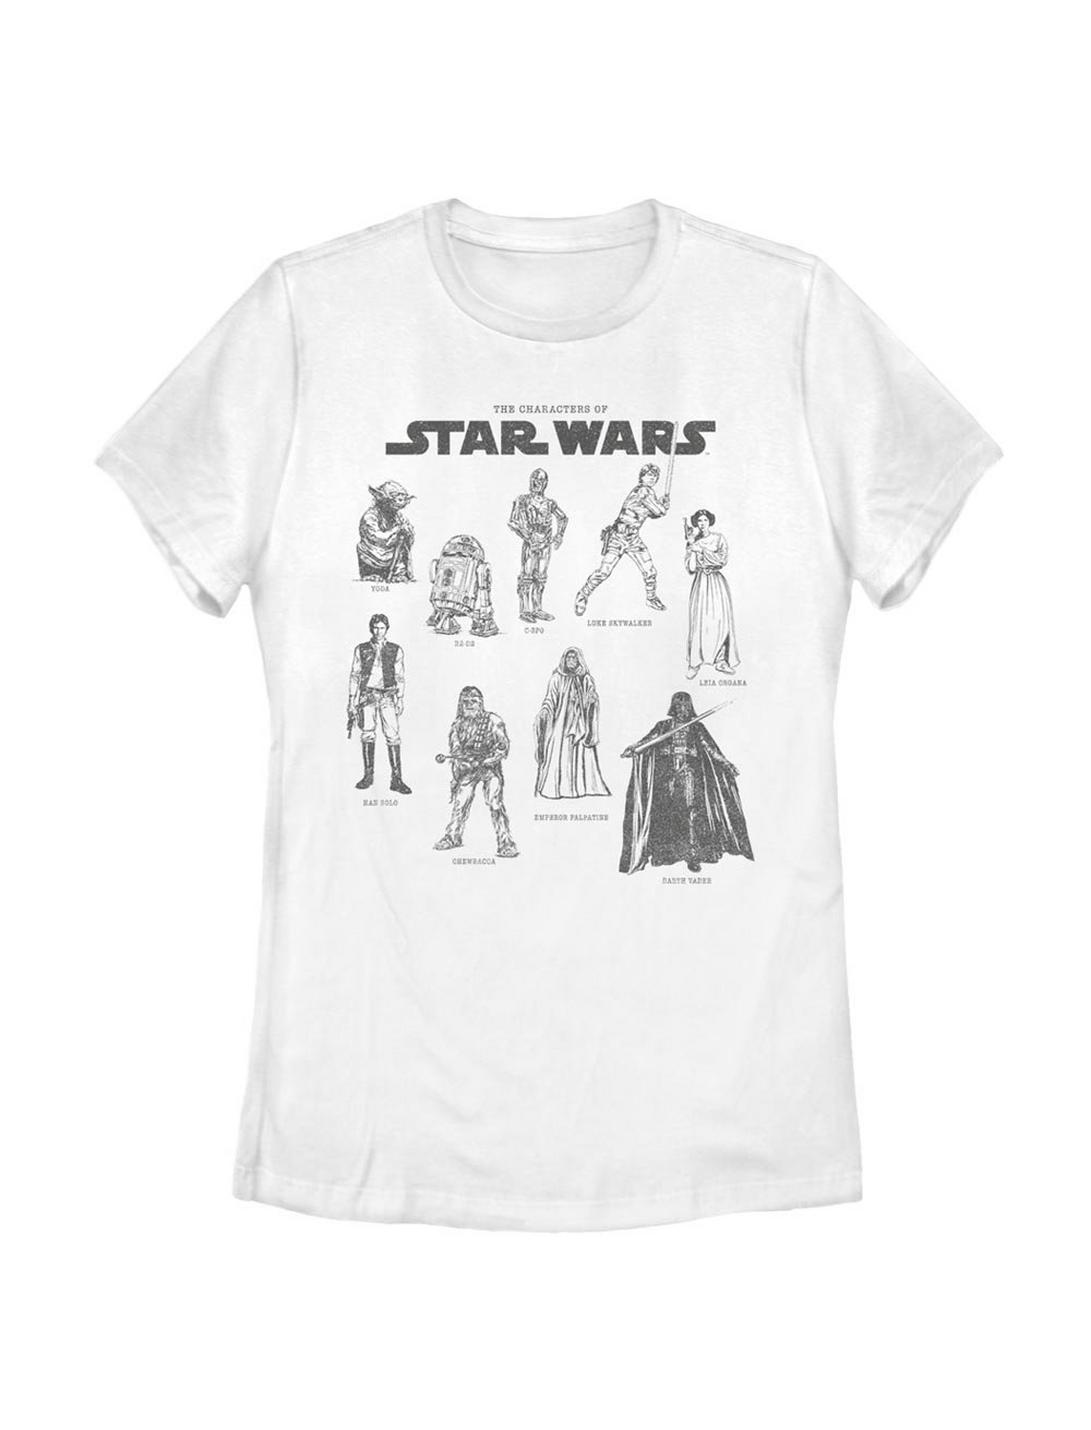 Plus Size Star Wars Character Chart Womens T-Shirt, WHITE, hi-res